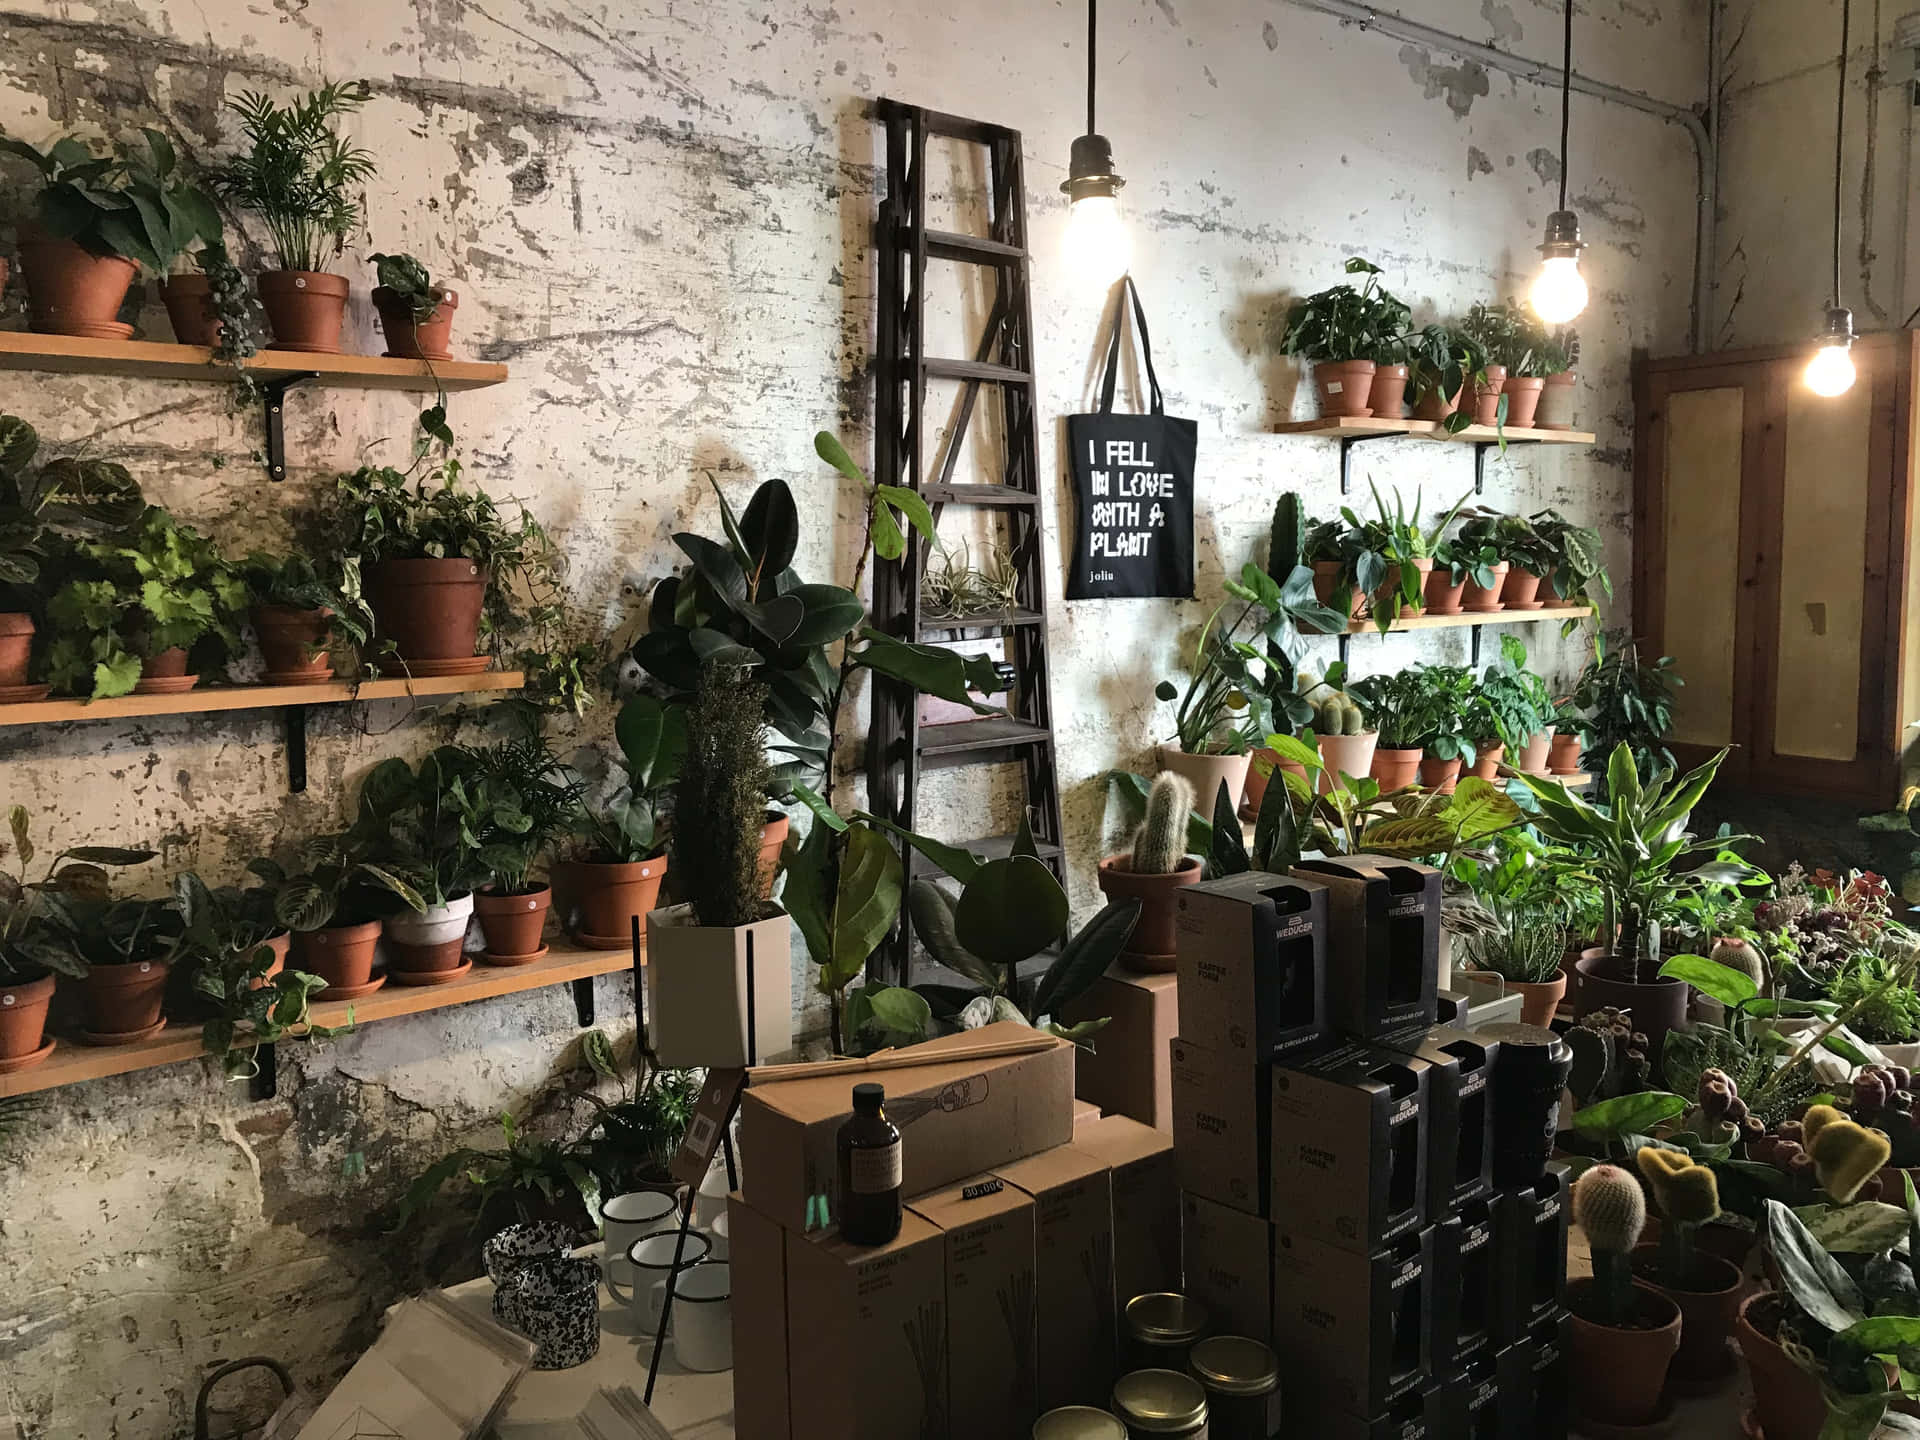 A Store With Many Potted Plants And Pots